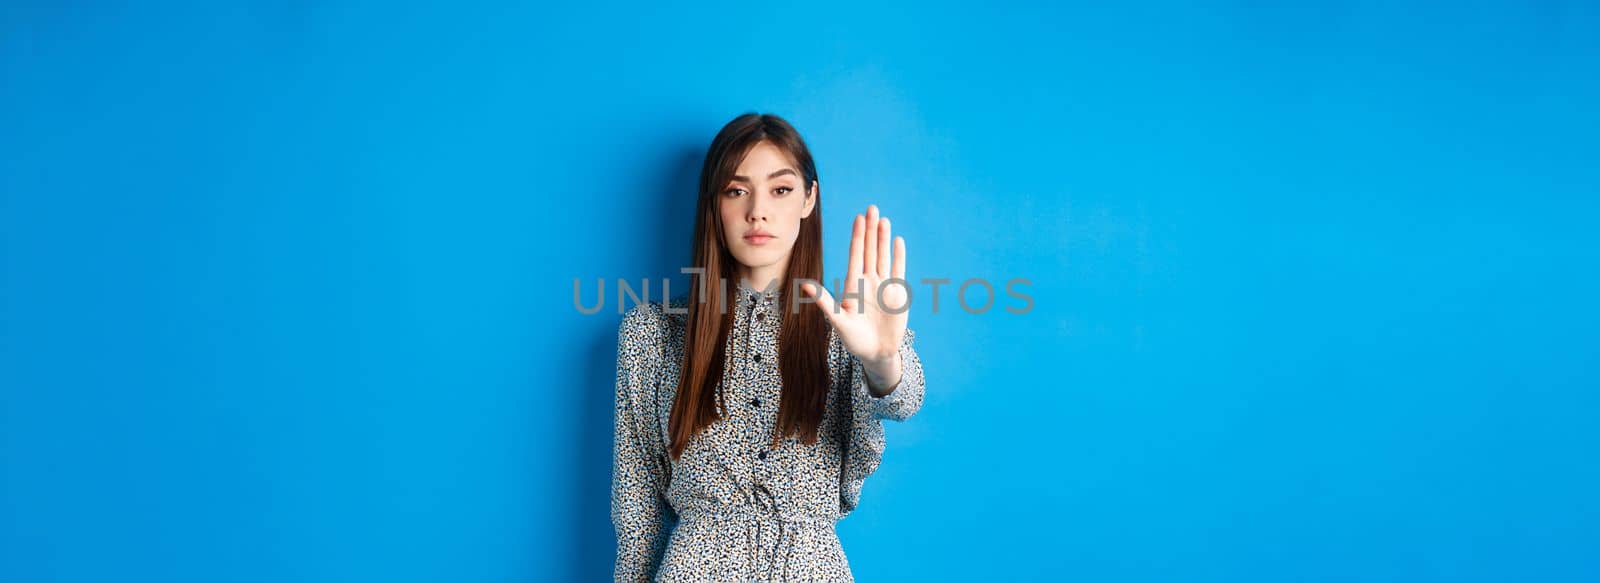 Serious and confident woman with long hair and dress, stretch out hand and say no, make stop gesture, prohibit bad action, standing on blue background.